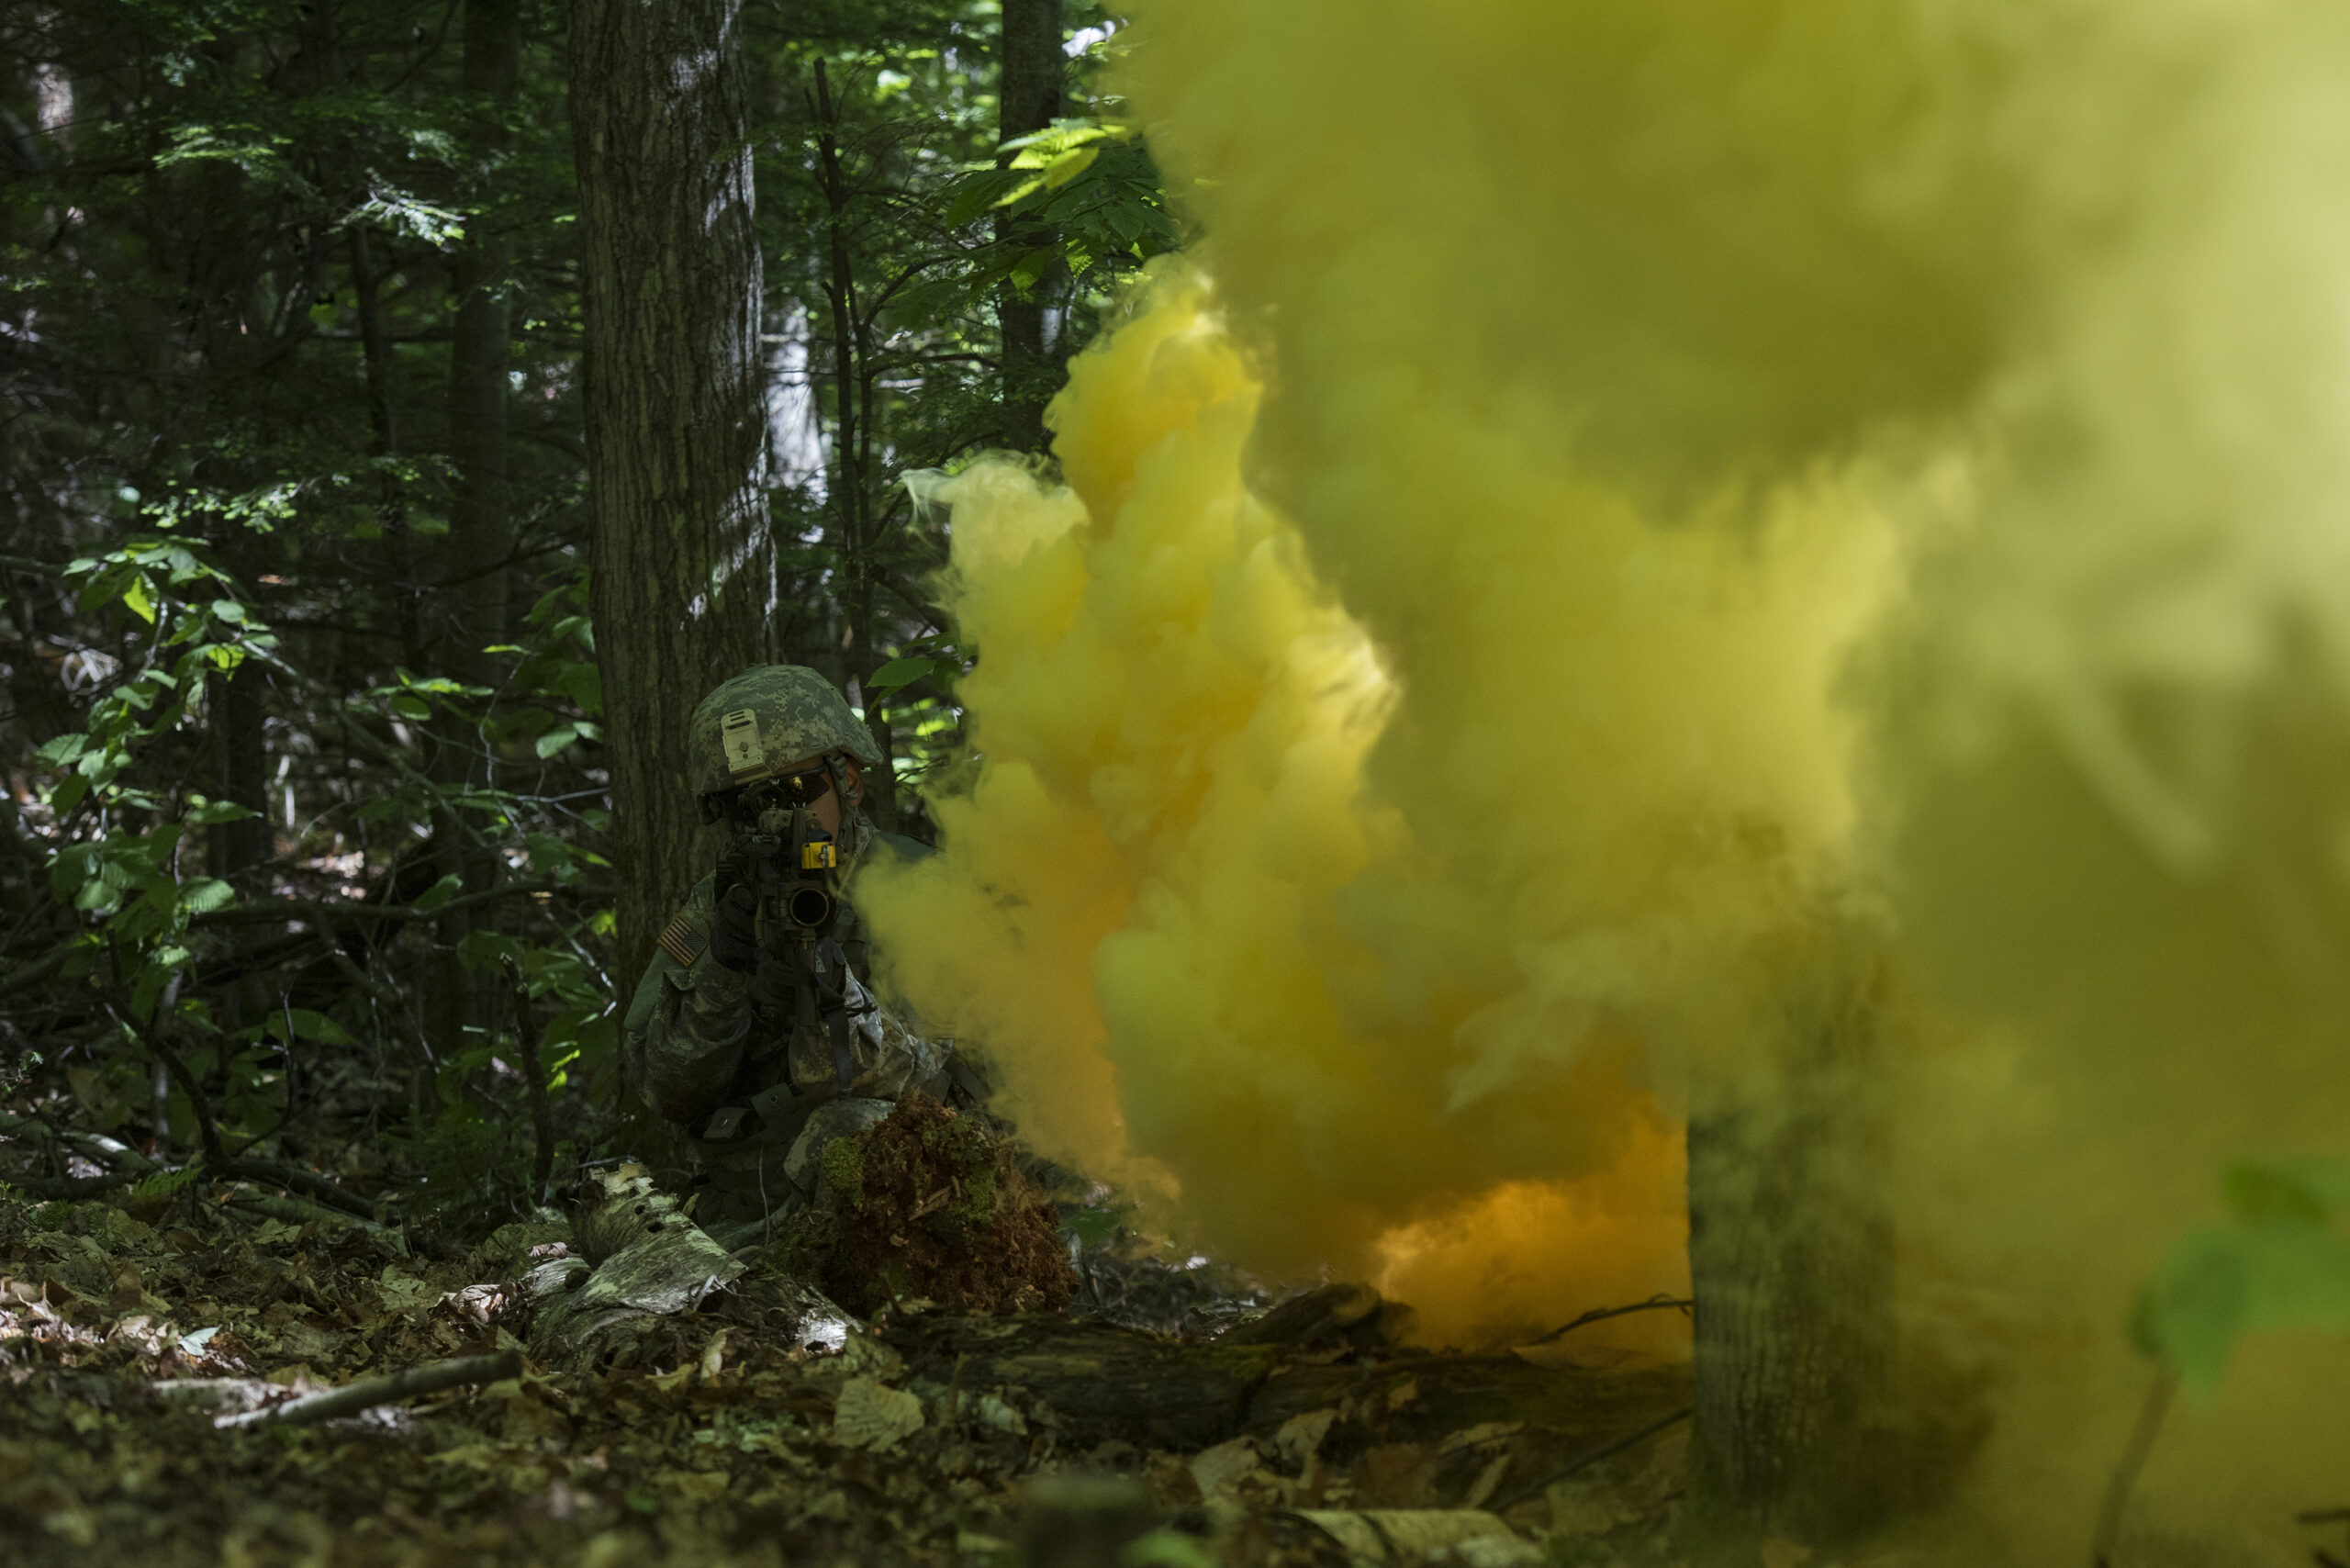 U.S. Army Pfc. Saul Hernandez, assigned to Alpha Company, 3rd Battalion, 172nd Infantry Regiment, 86th Infantry Brigade Combat Team (Mountain), Vermont National Guard, waits while smoke from a grenade creates cover, Camp Ethan Allen Training Site, Jericho, Vt., June 15, 2016. Hernandez is running through an assault lane as part of a buddy-team exercise, during the unit’s two-week annual training. (U.S. Air National Guard photo by Tech. Sgt. Sarah Mattison/Released)